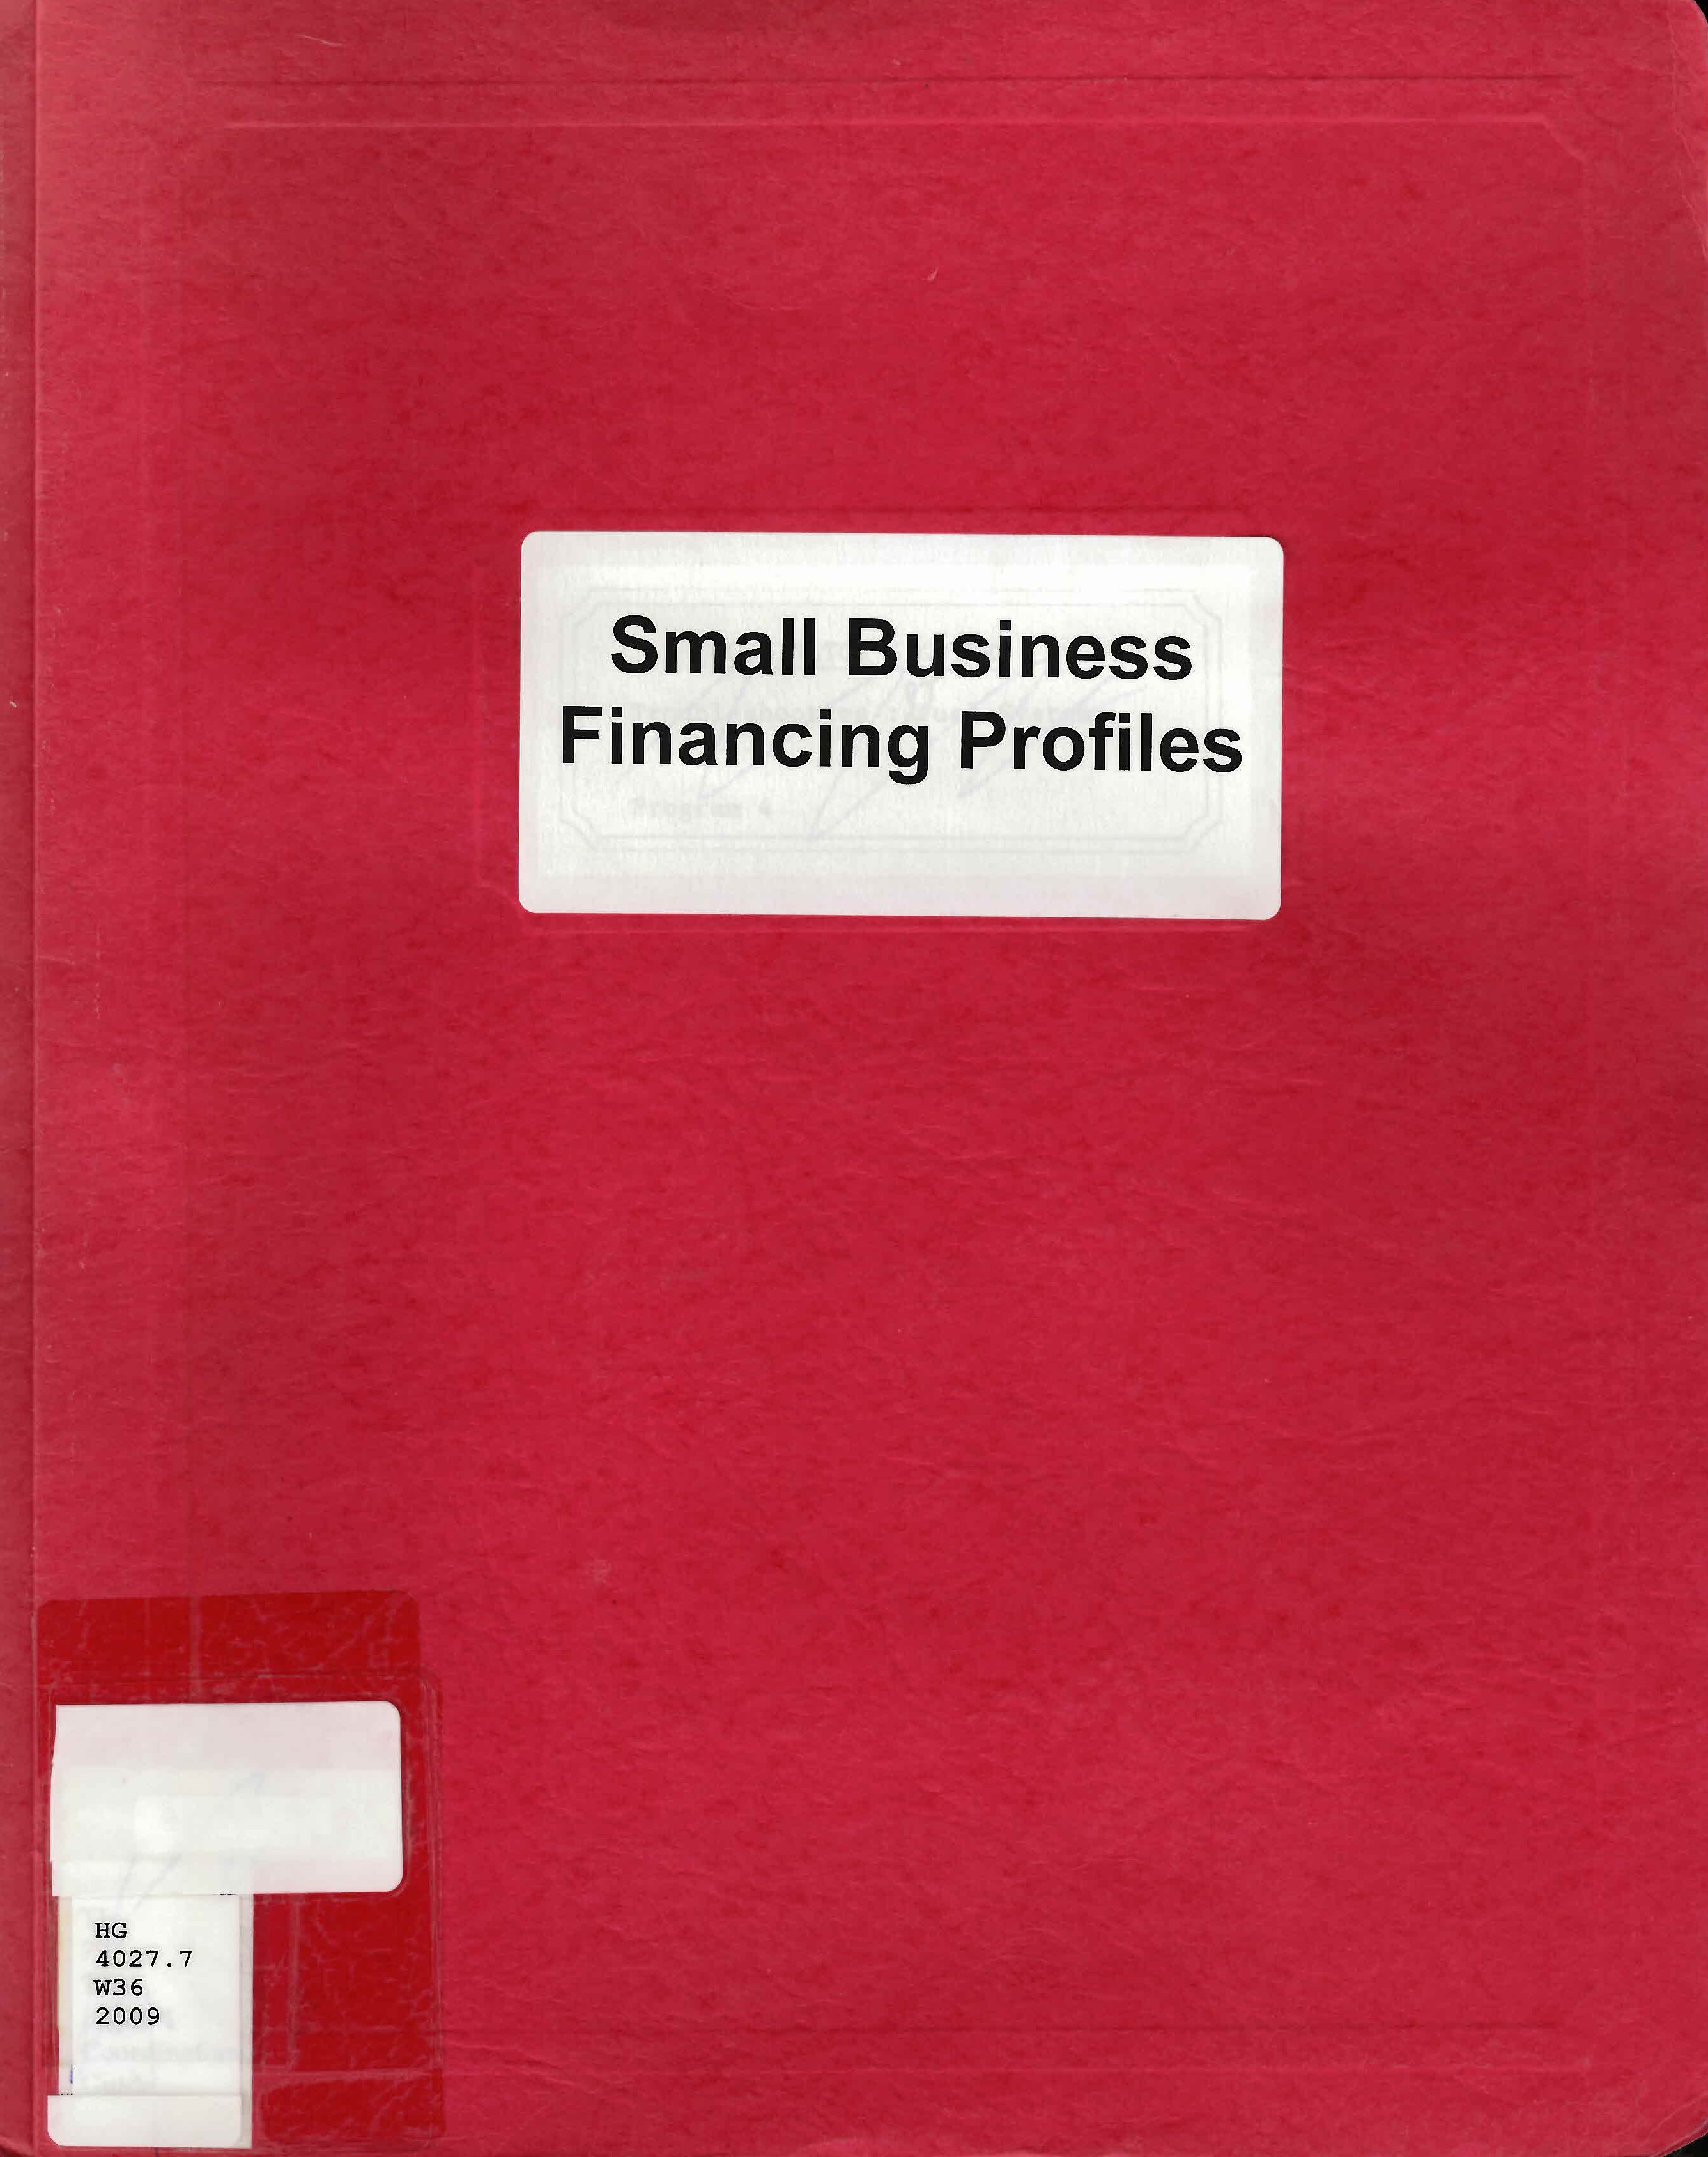 Small business financing profiles : financing innovative small and medium-sized enterprises in Canada